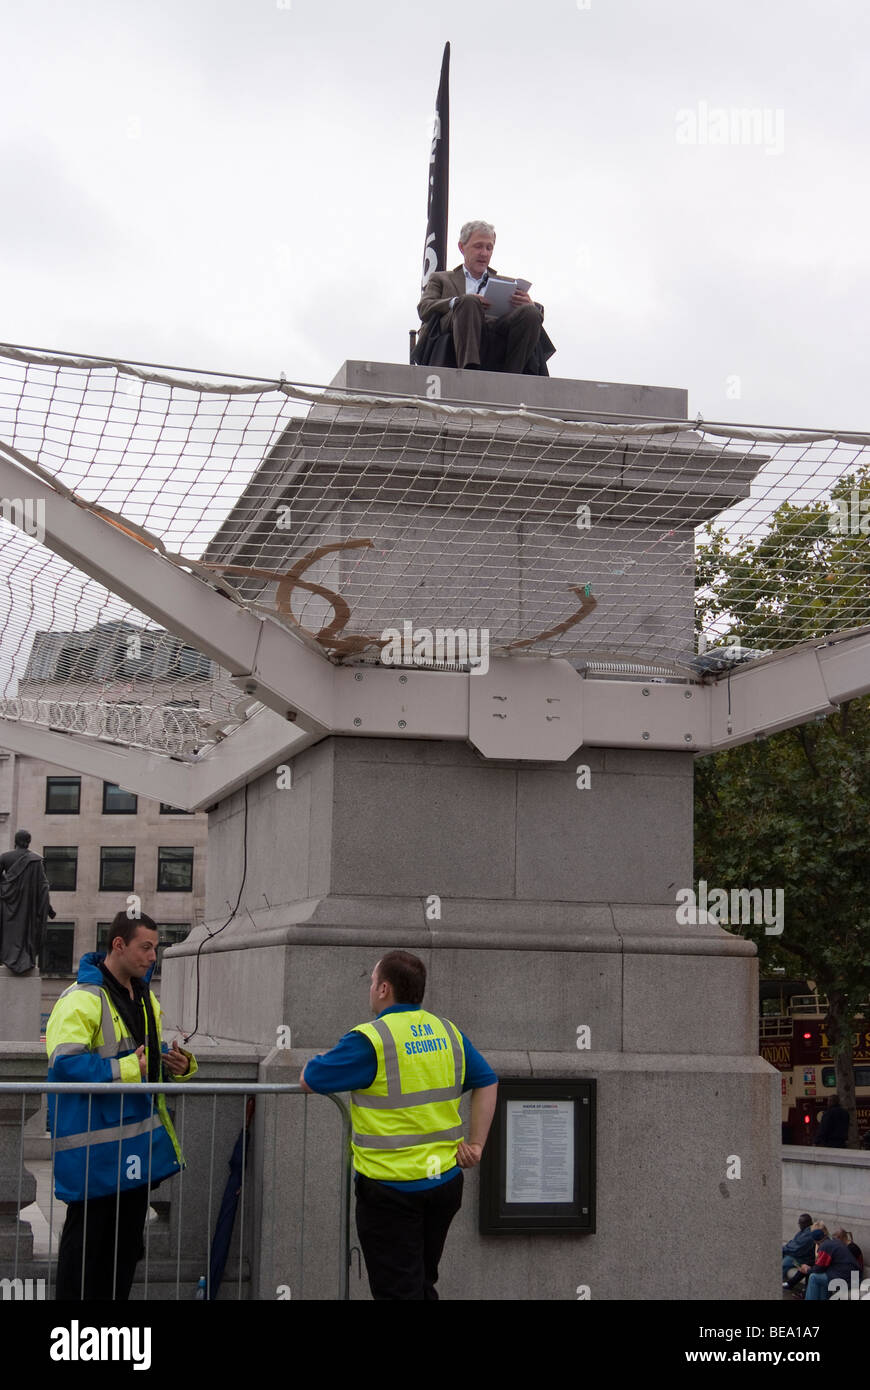 Antony Gormley's One & Other living artwork on the 4th Plinth in Trafalgar Square Stock Photo